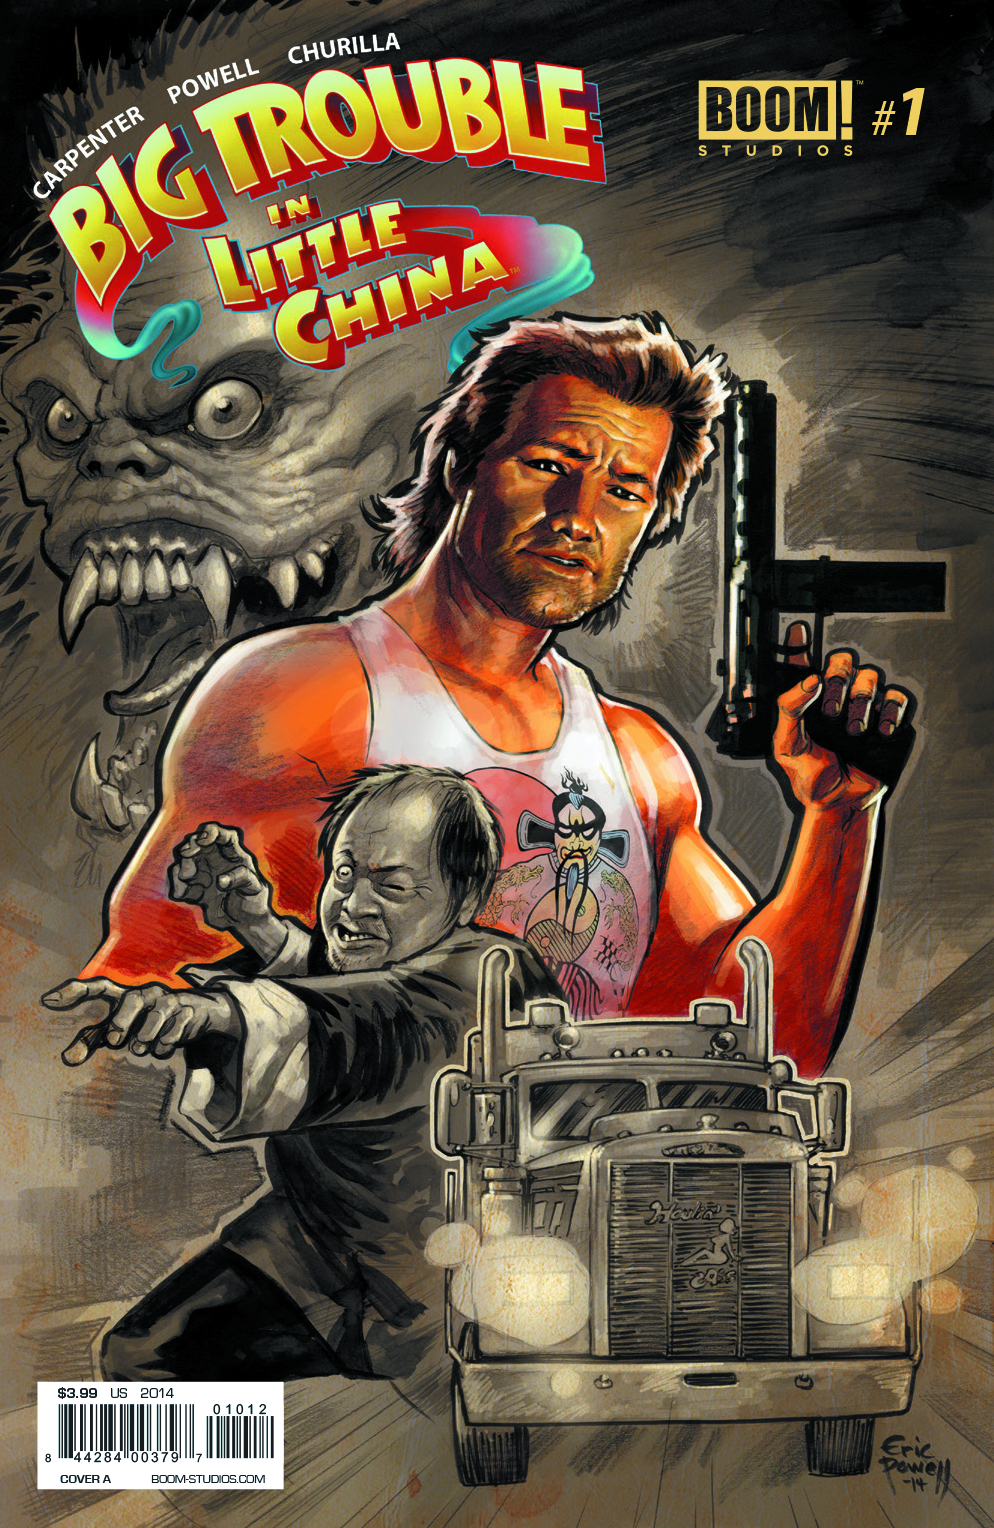 BIG TROUBLE IN LITTLE CHINA #1 (2ND PTG) (PP